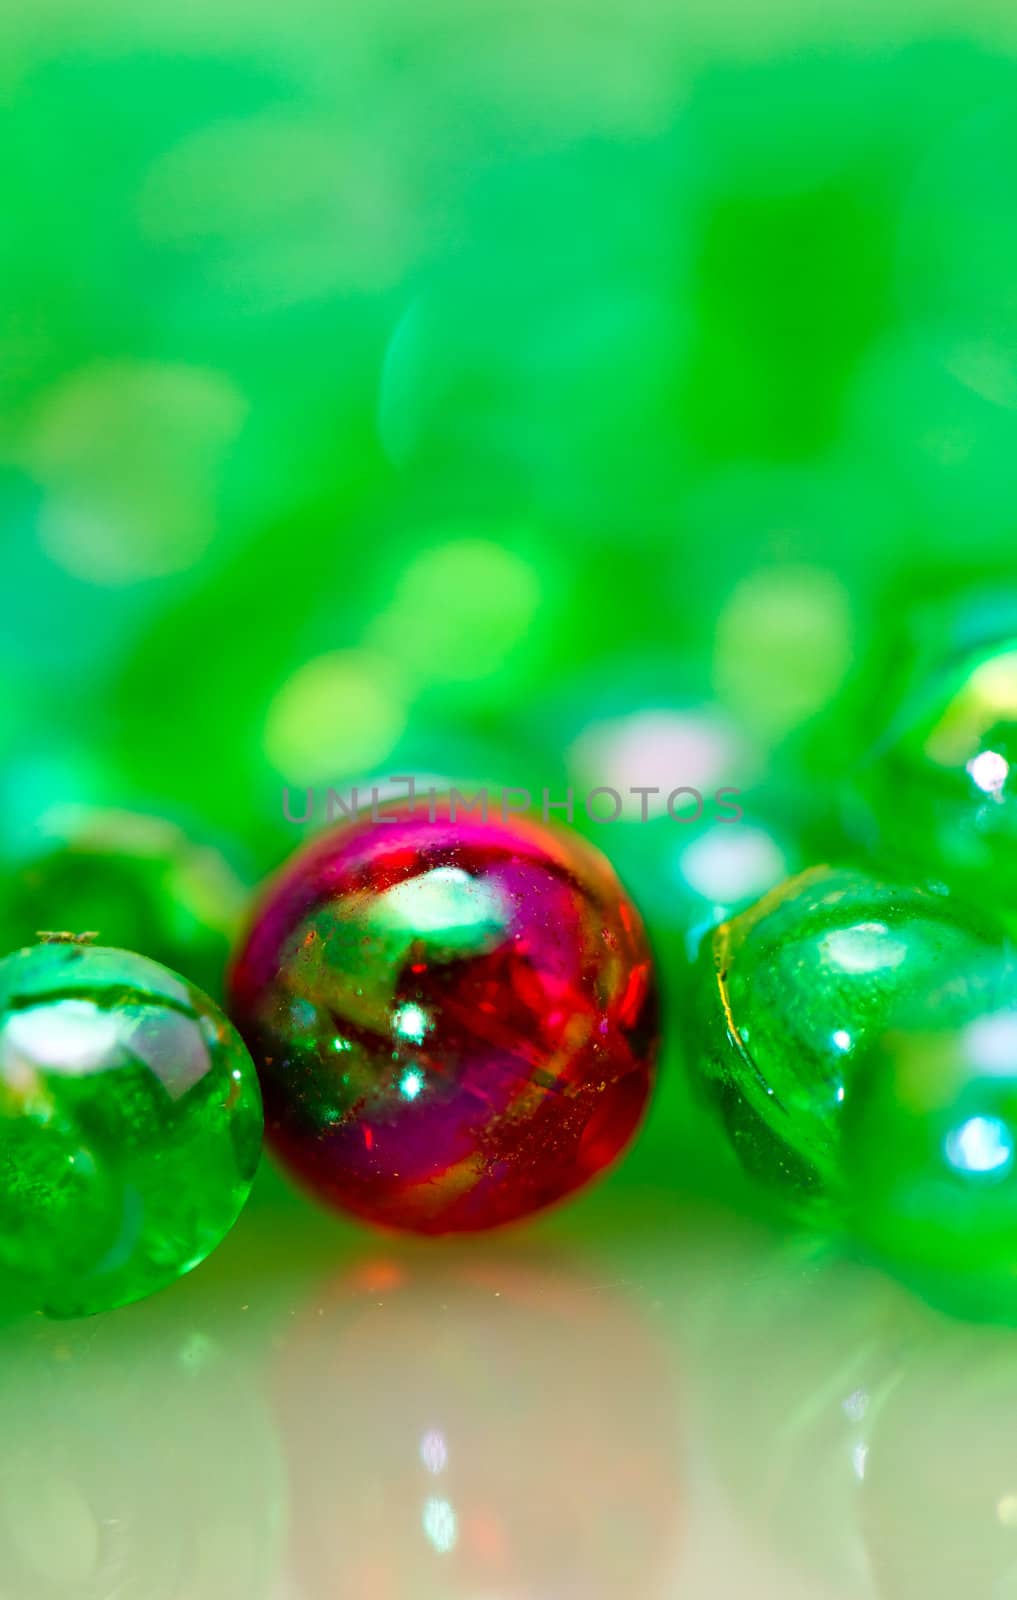 Red beads among the green smaller beads with mirror image in portrait orientation